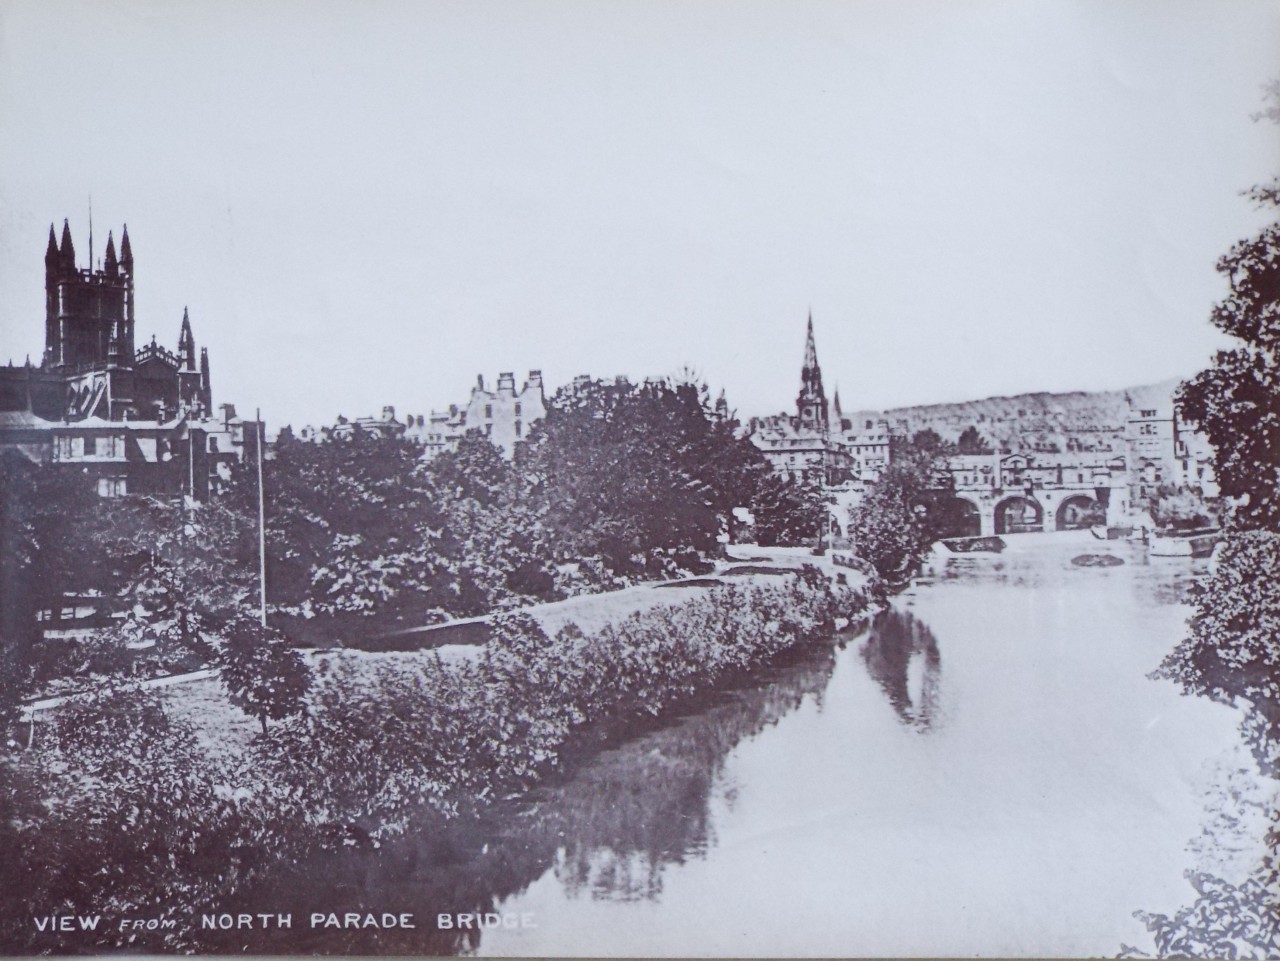 Photograph - View from North Parade Bridge